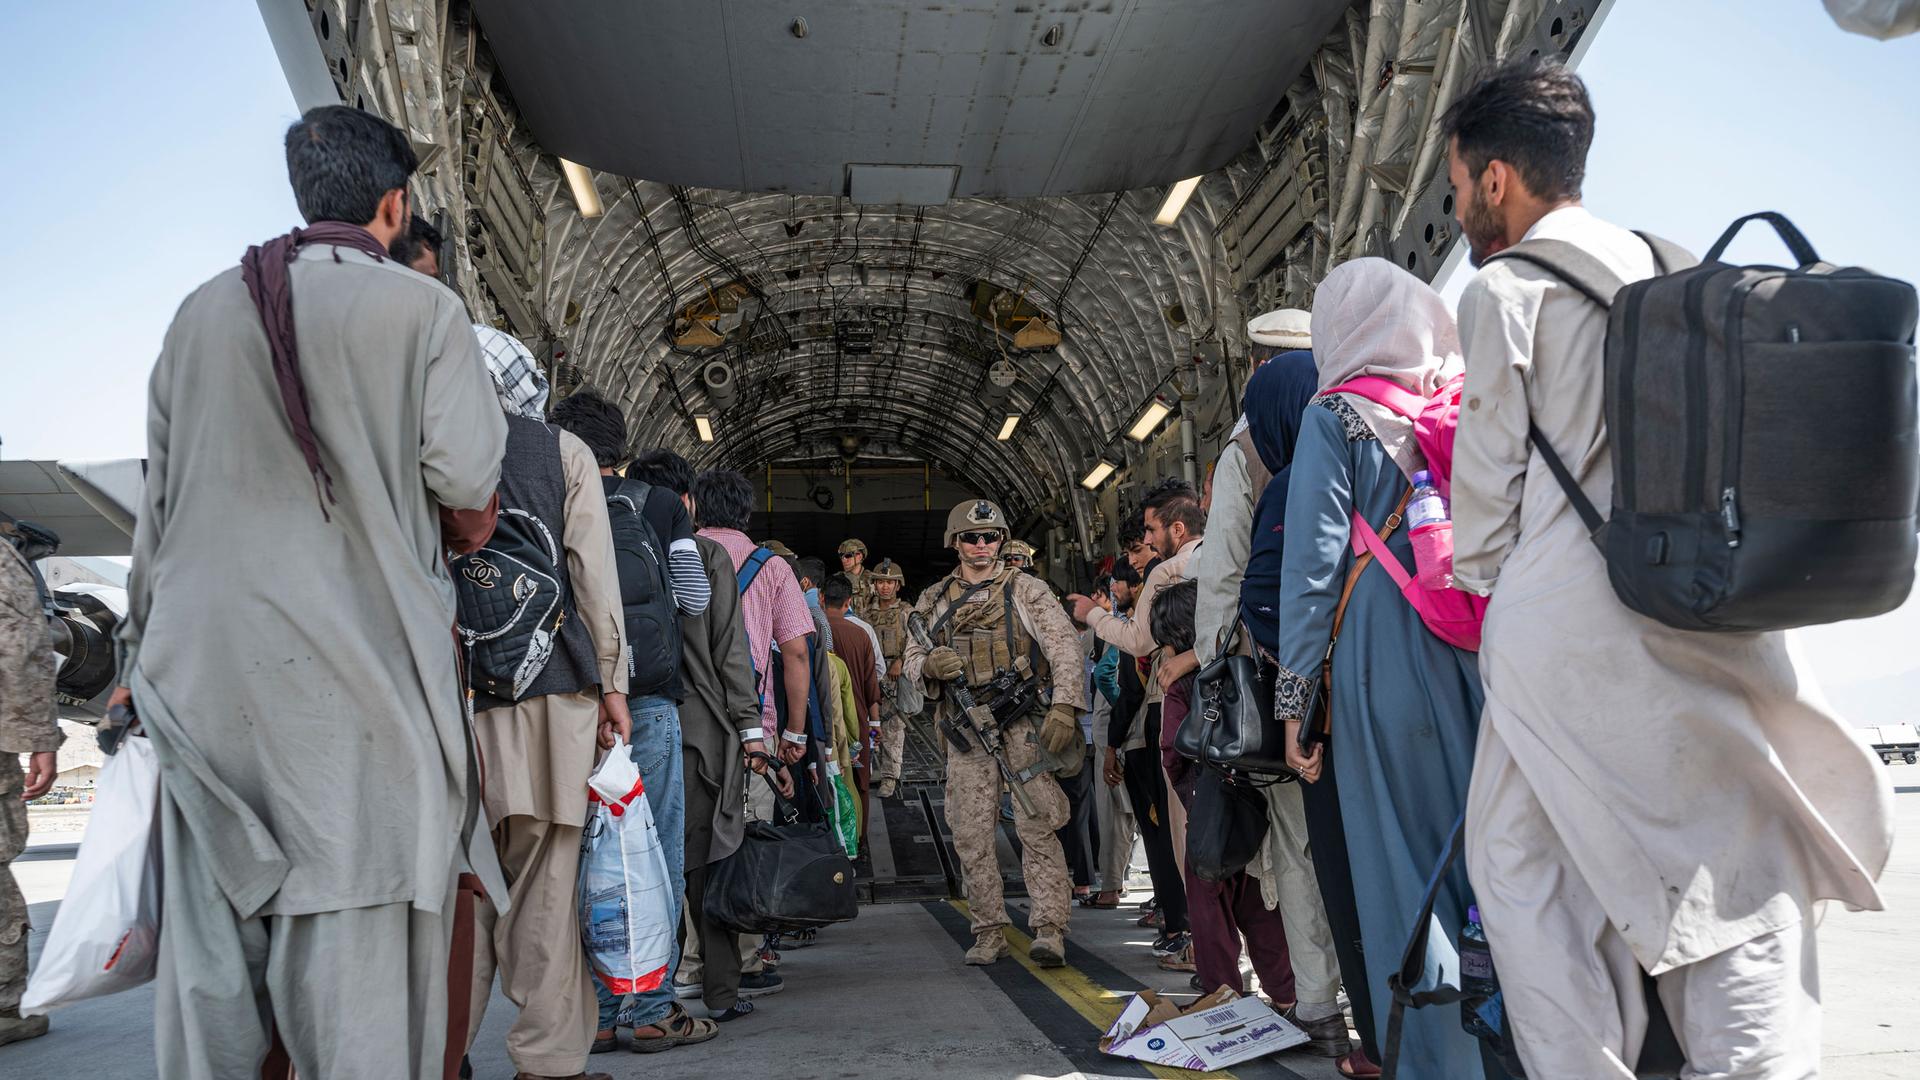 In this Aug. 21, 2021, image provided by the U.S. Air Force, US Airmen and U.S. Marines guide evacuees aboard a US Air Force C-17 Globemaster III in support of the Afghanistan evacuation at Hamid Karzai International Airport in Kabul, Afghanistan. 